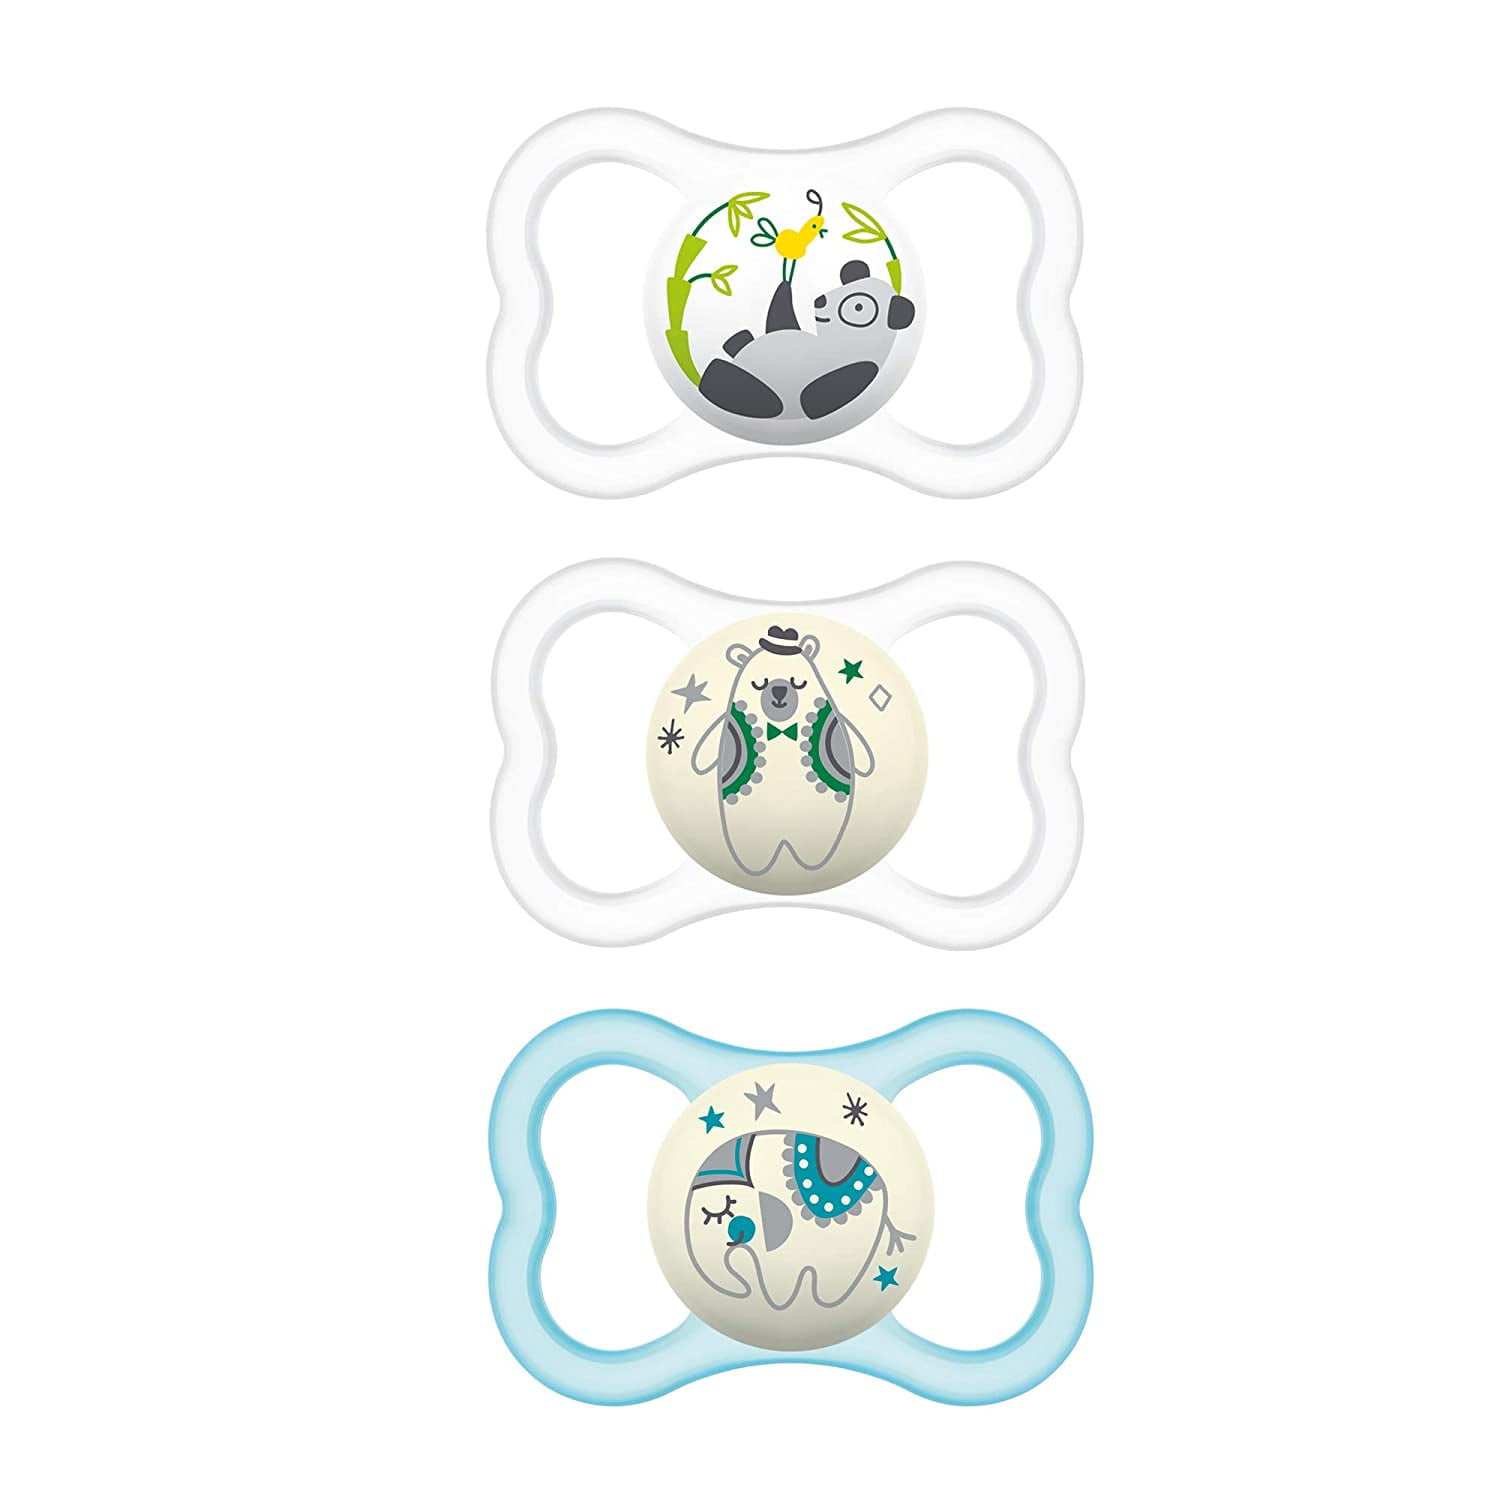 MAM Supreme Night Soother 0-6 months, set of 2